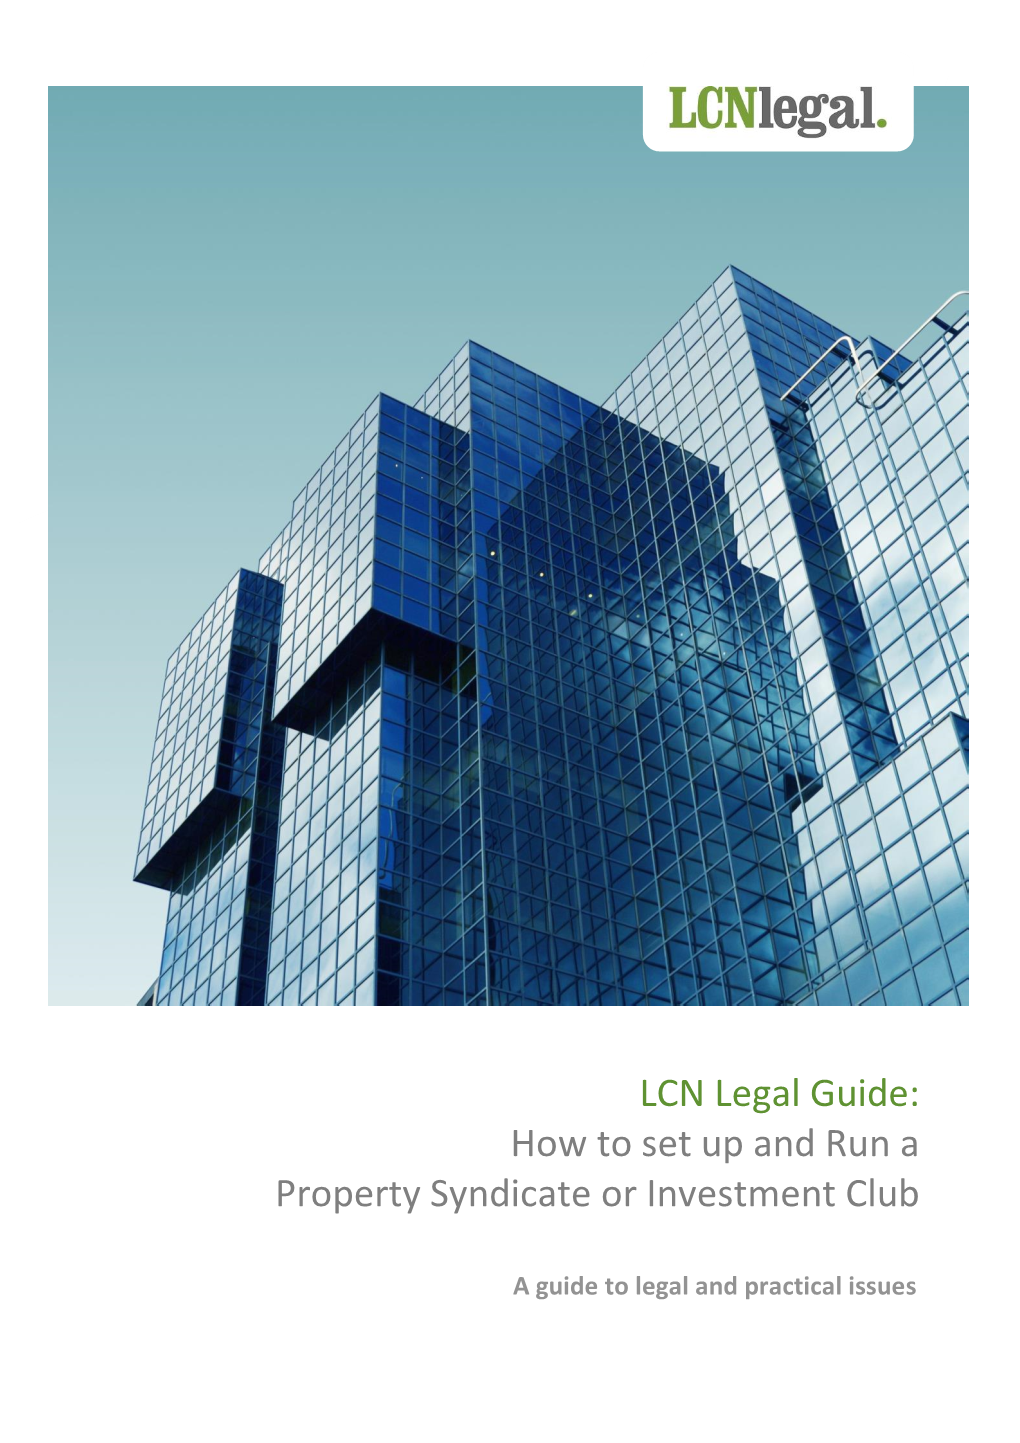 LCN Legal Guide: How to Set up and Run a Property Syndicate Or Investment Club